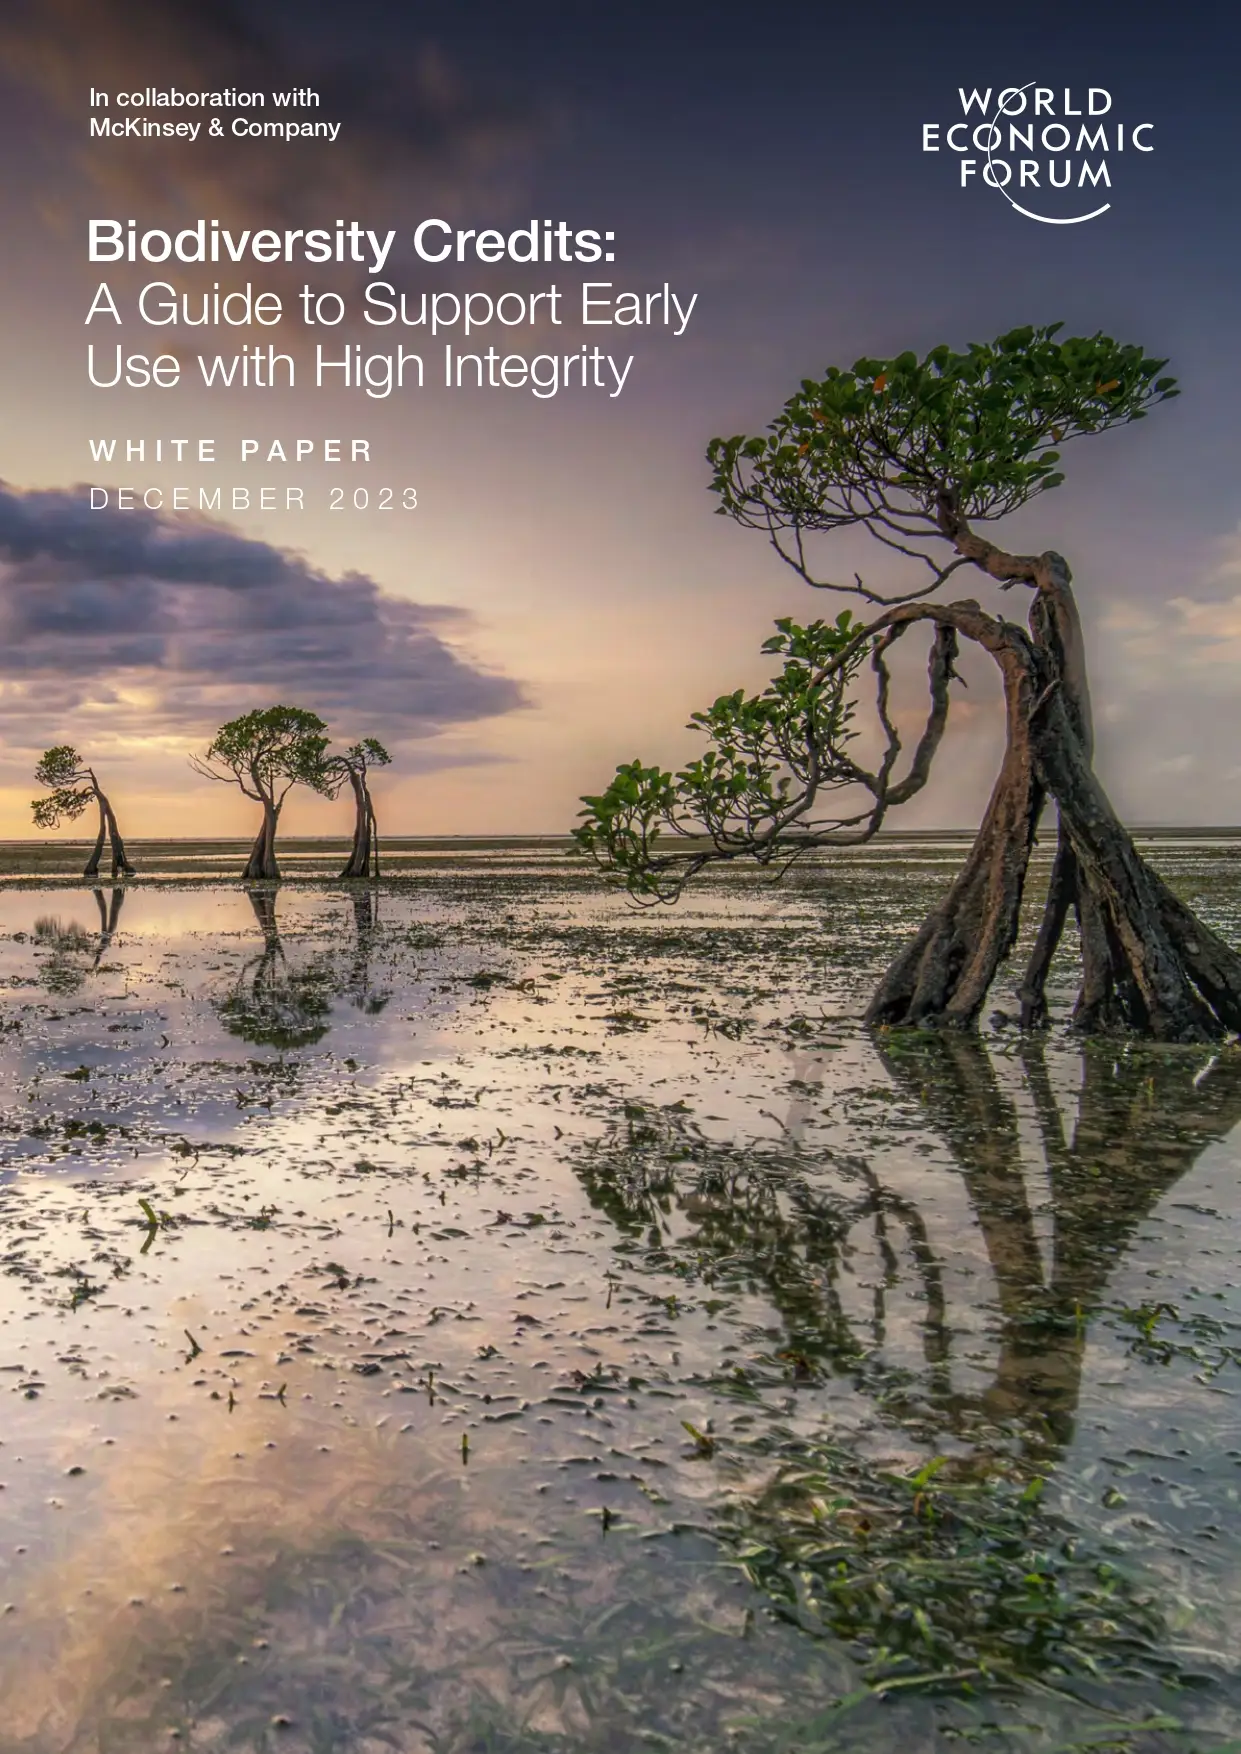 Biodiversity Credits: A Guide to Support Early Use with High Integrity